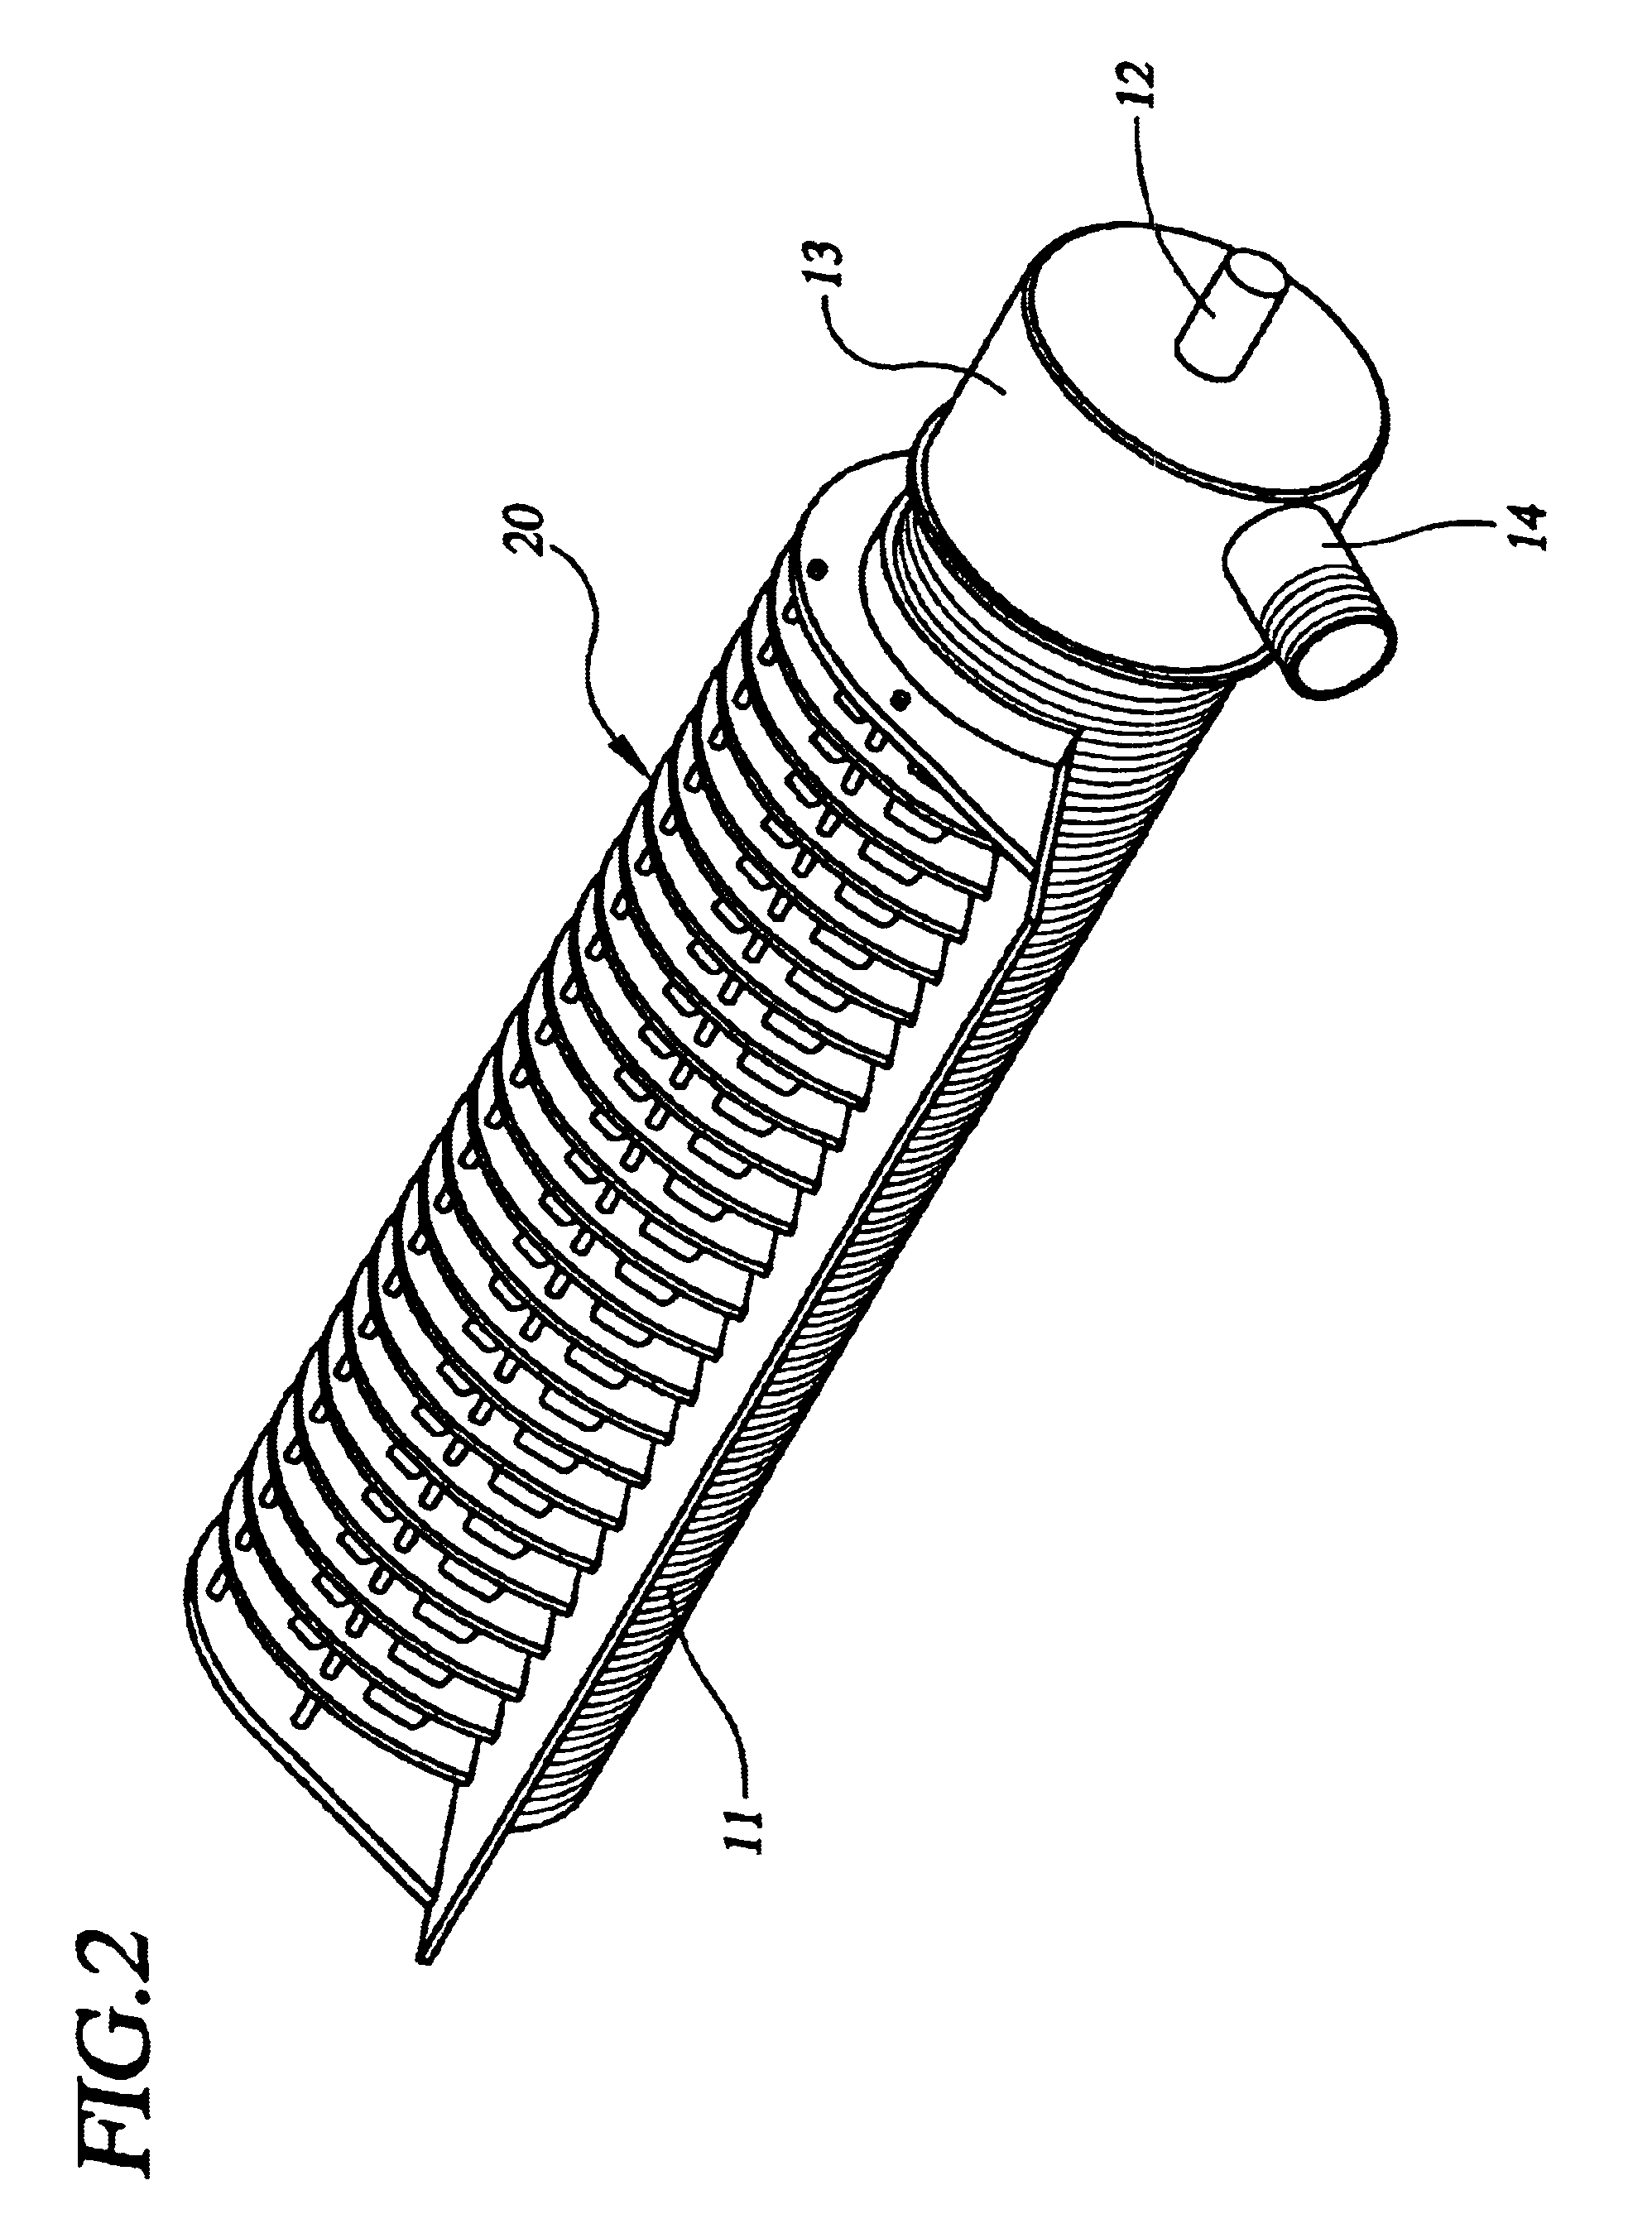 Method and apparatus for removing fluids from drill cuttings